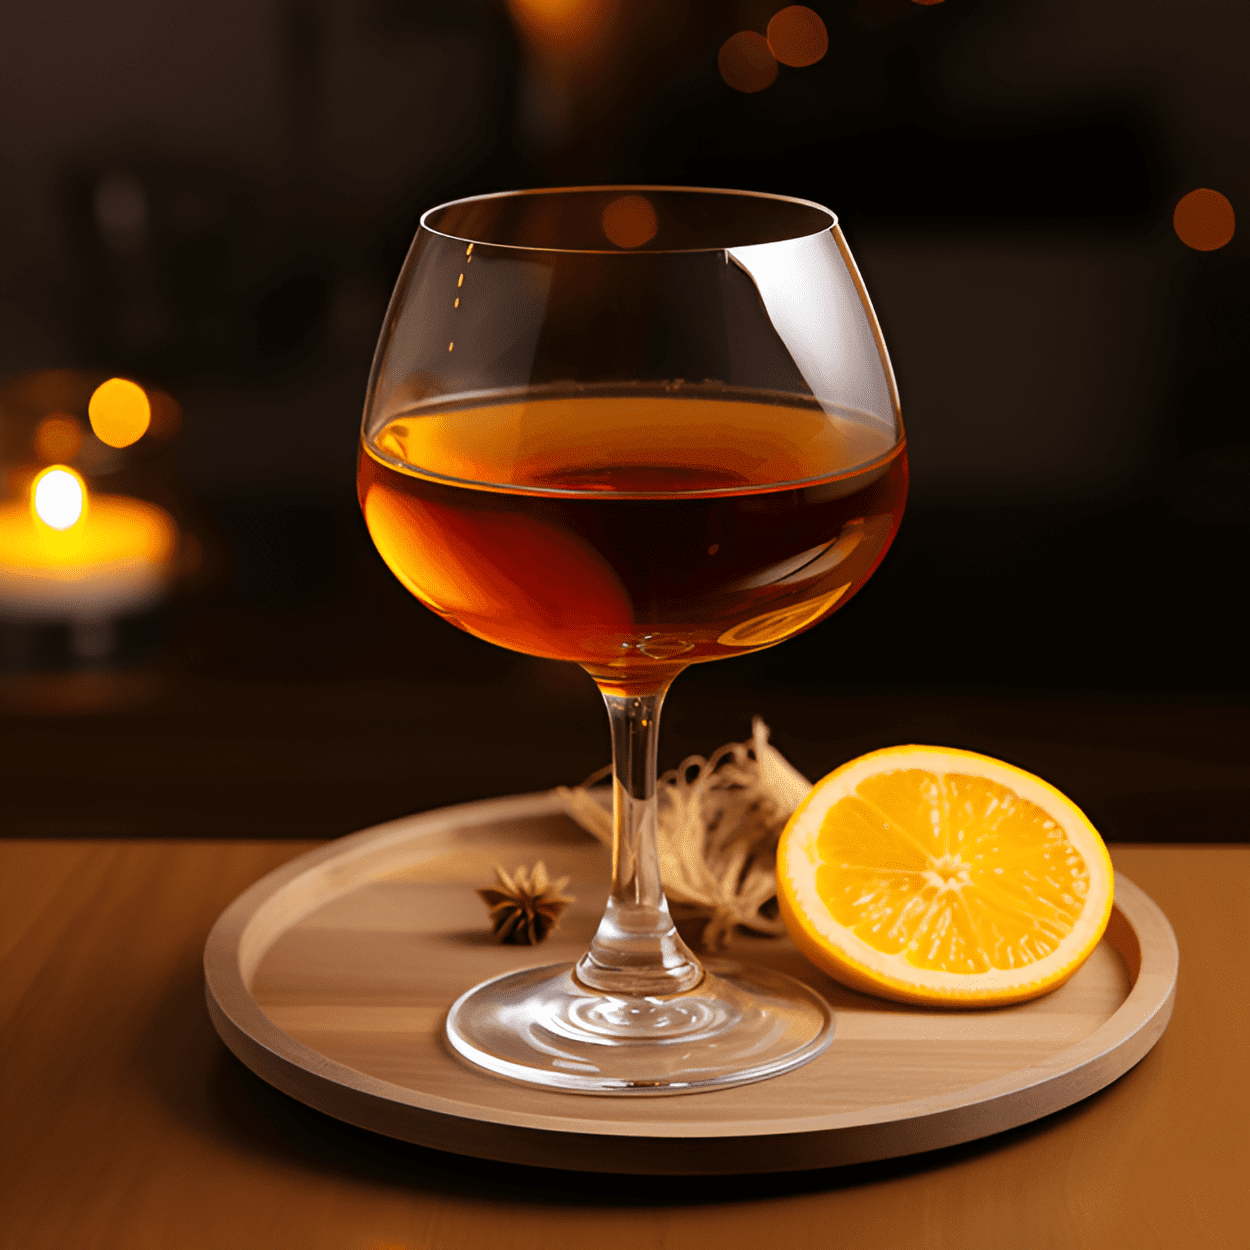 Grand Hennessy Cocktail Recipe - The Grand Hennessy is a rich and complex cocktail. It has a strong, warm cognac base, which is balanced by the sweetness of the Grand Marnier. The lemon juice adds a hint of sourness, which complements the sweetness perfectly. The cocktail is smooth, with a long, lingering finish.